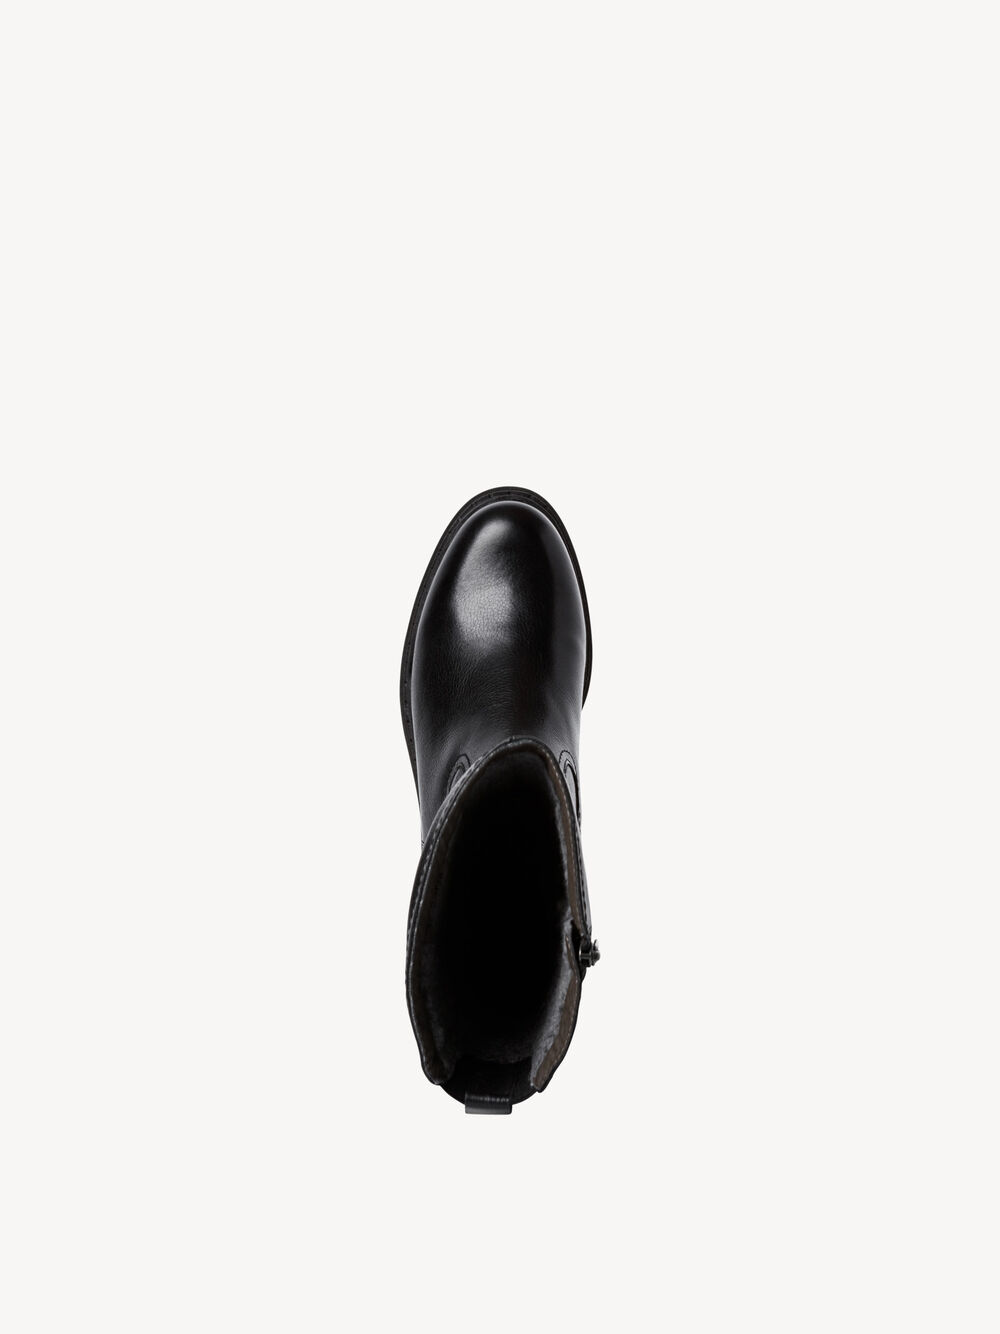 Leather Boots - black 8-8-86410-29-022: Buy Tamaris Boots online!